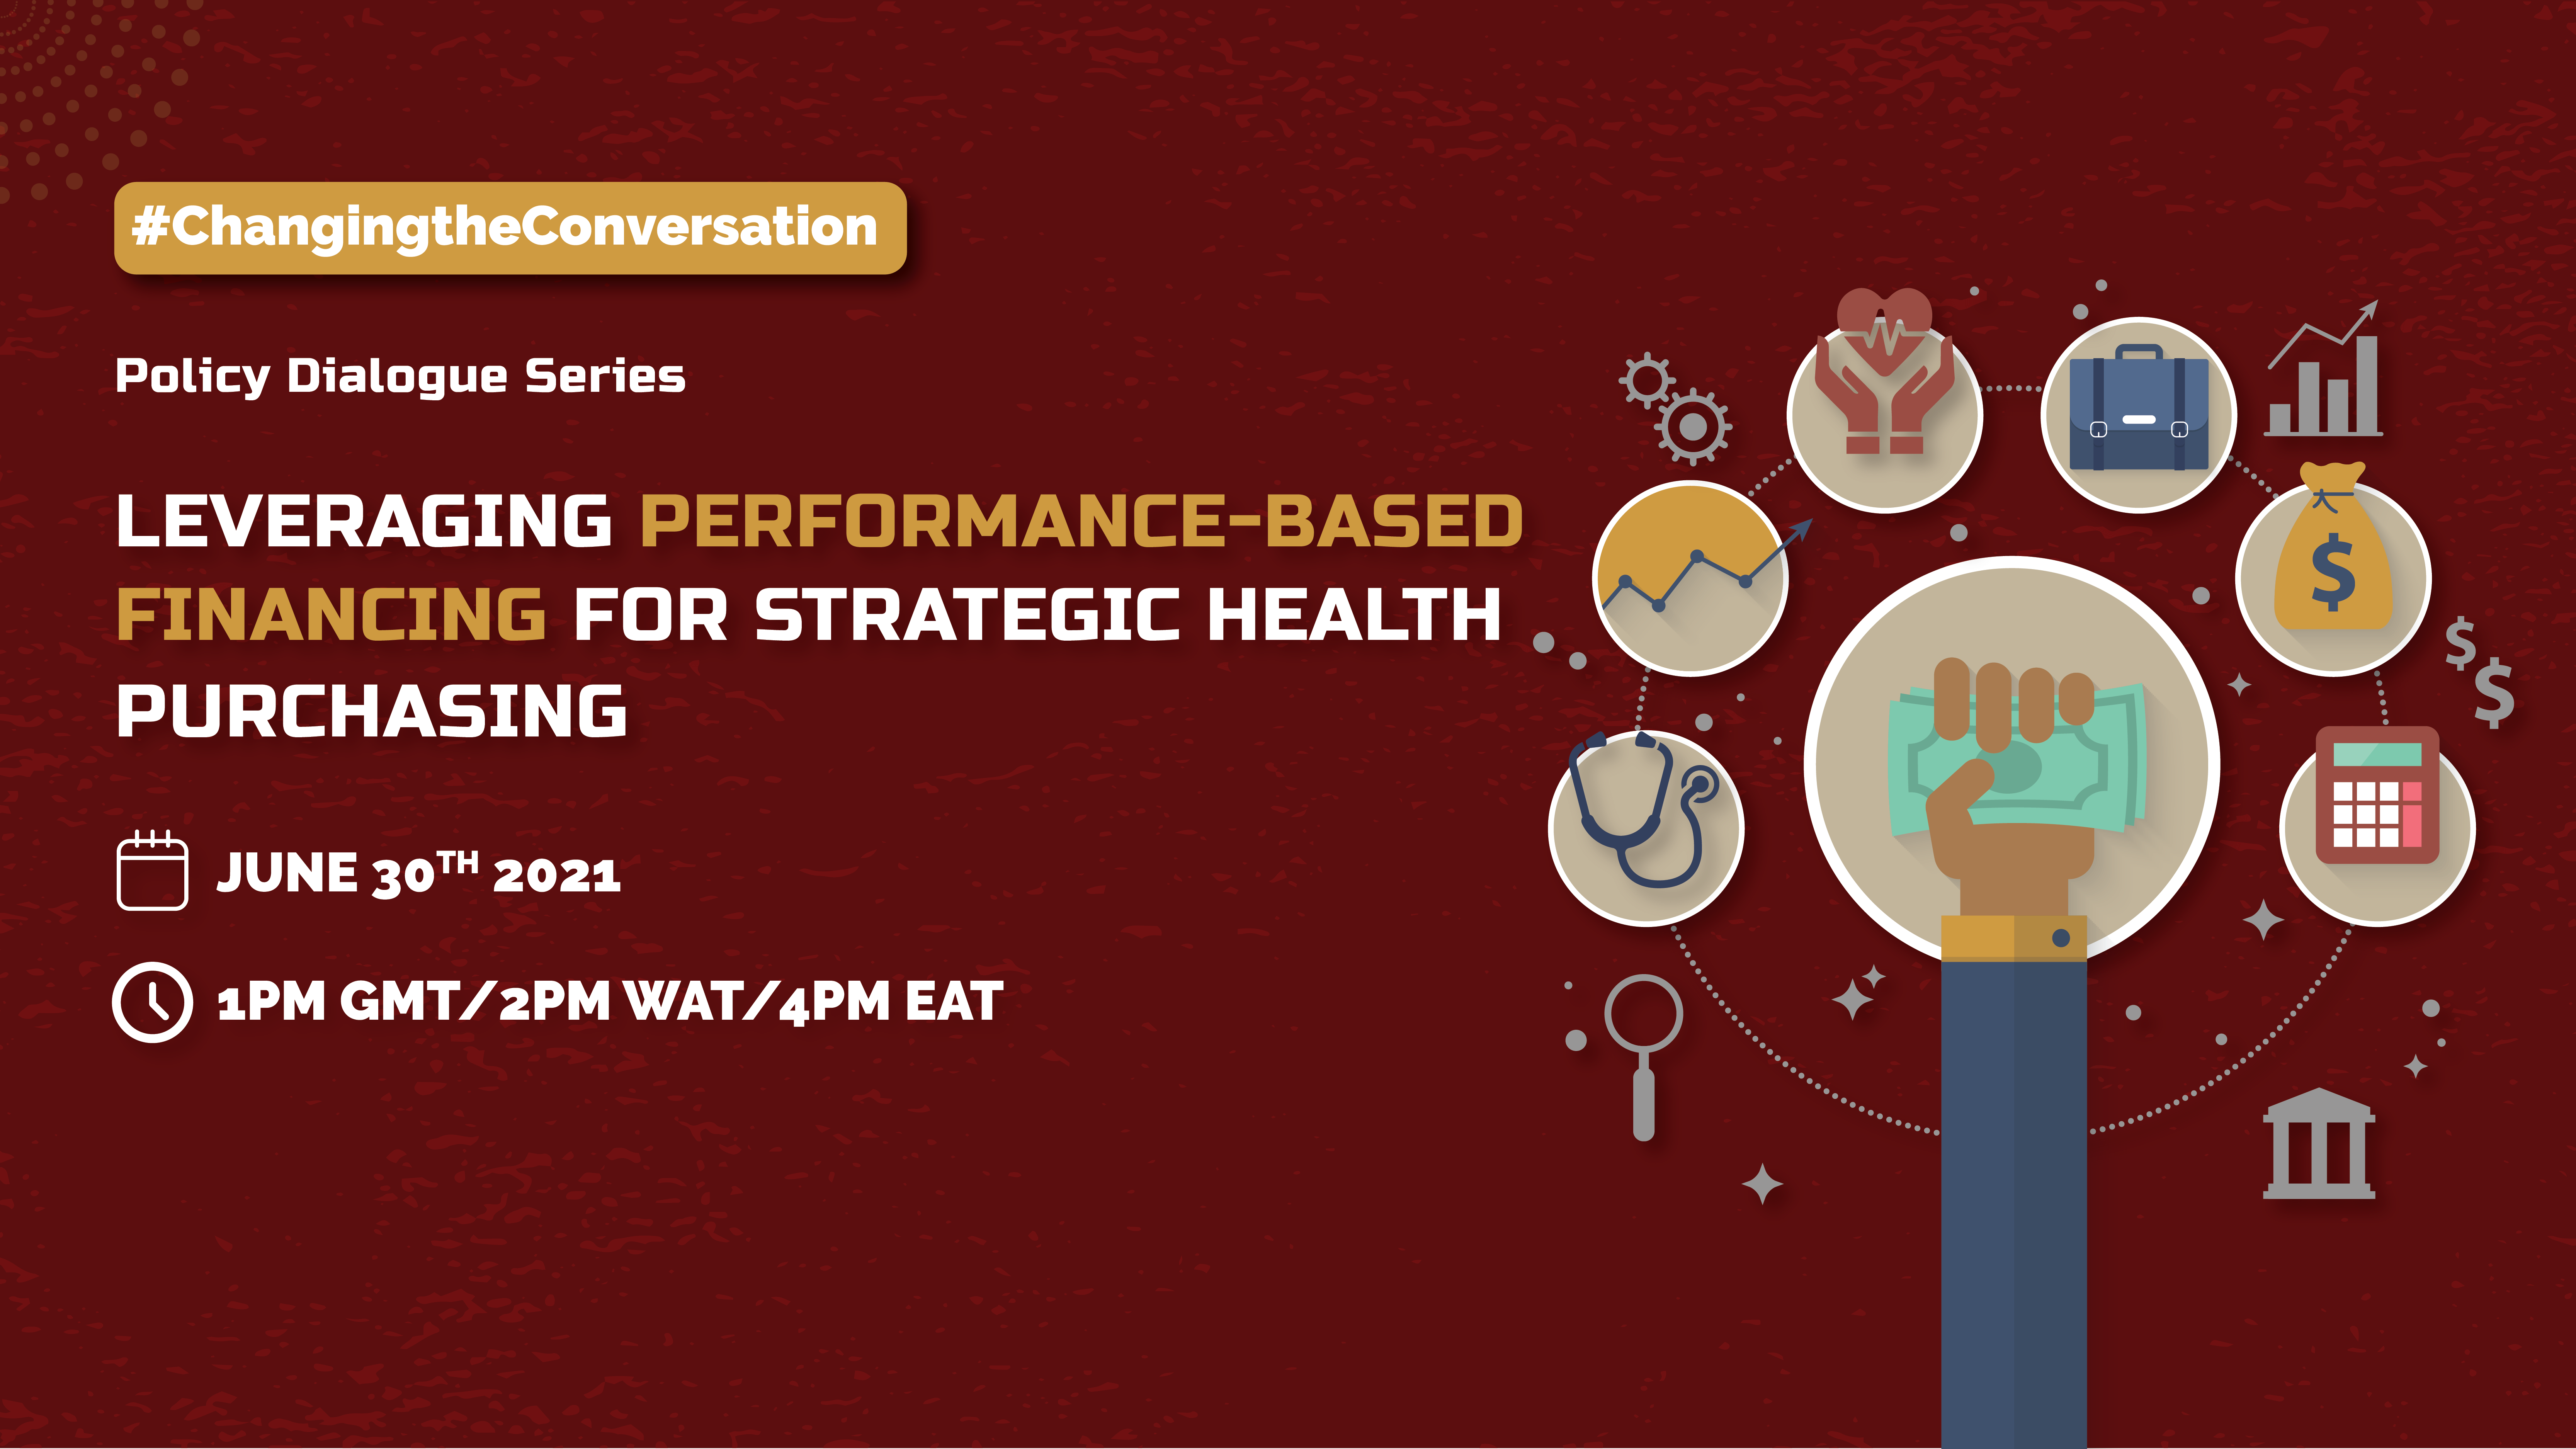 Leveraging Performance-Based Financing for Strategic Health Purchasing